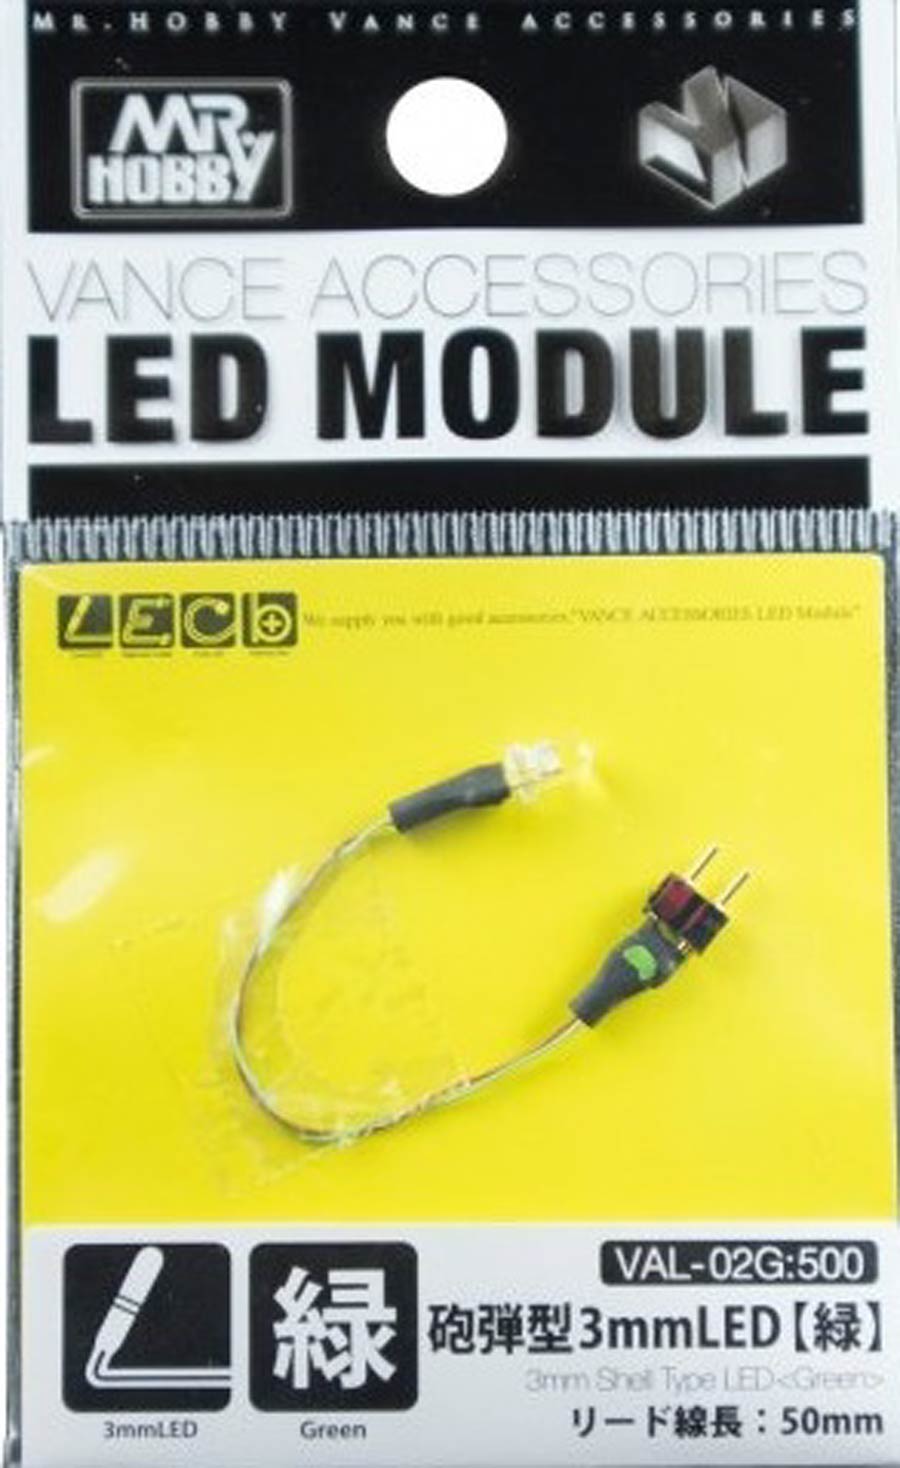 Mr. Hobby Vance Accessories LED Module - 3mm Shell Type LED (Green)